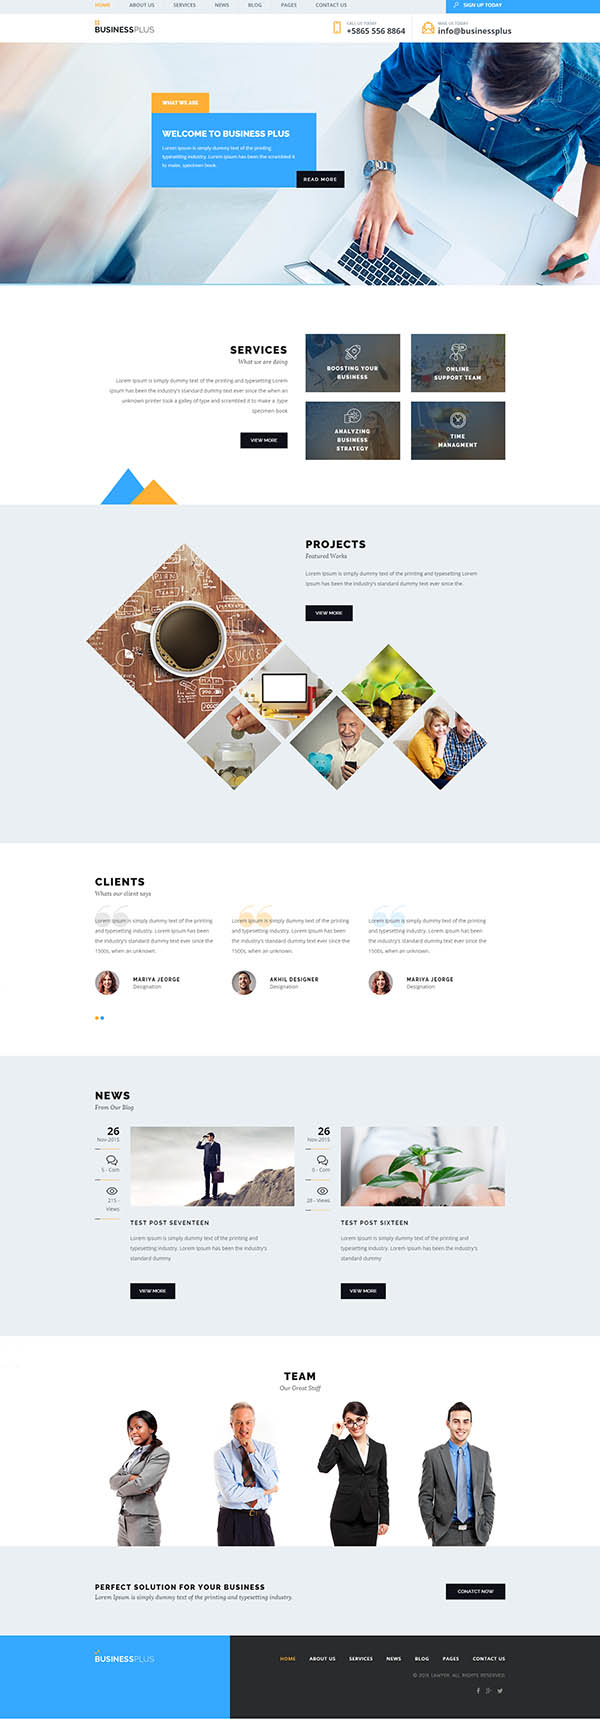 Business Plus – Corporate Business WP Theme